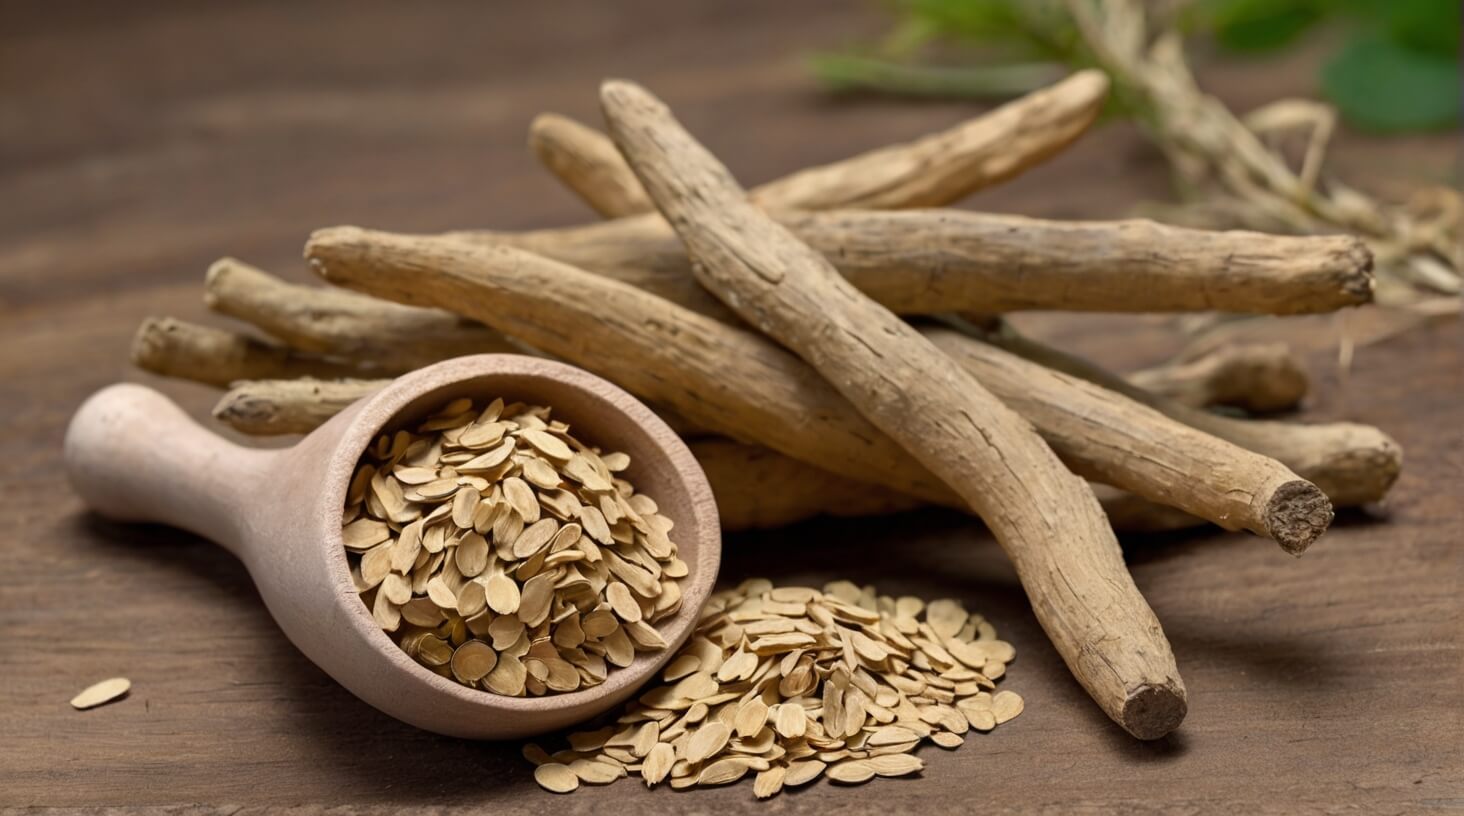 A close-up image of dried astragalus root, known for its immune-boosting properties